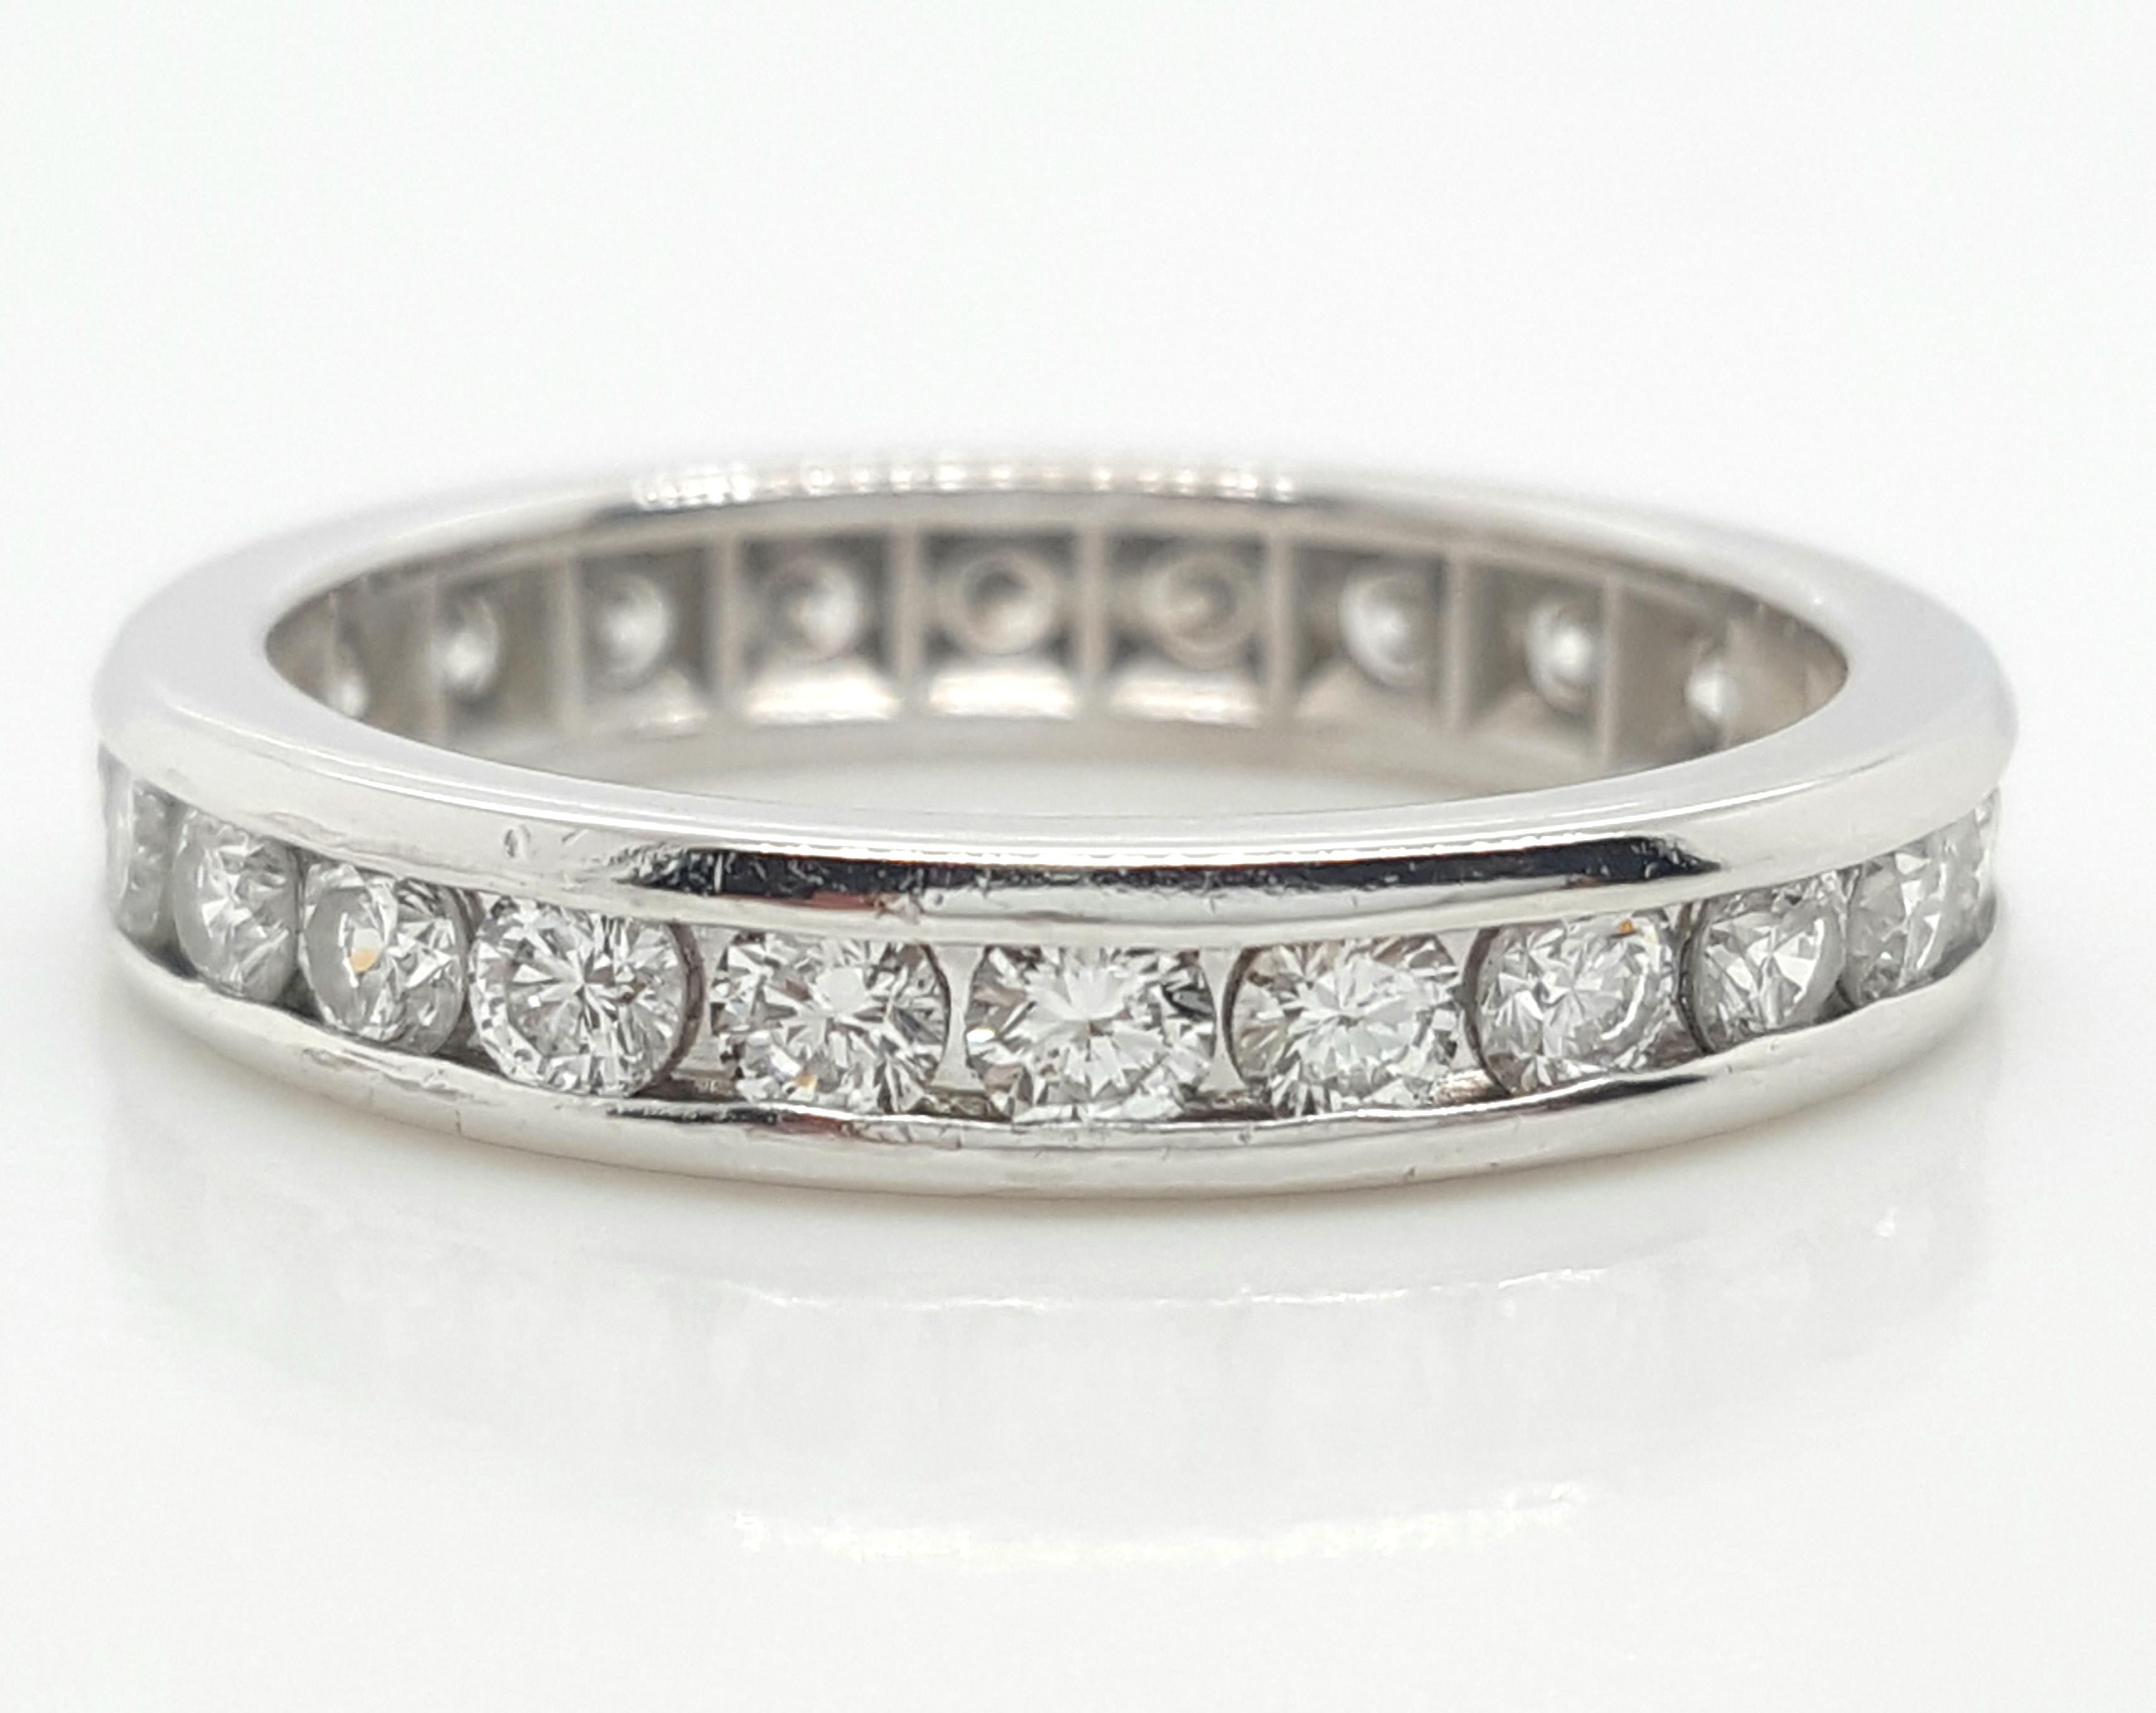 1.2 Carat Round Cut Diamond Vintage Platinum Eternity Band Ring, 1960s In Excellent Condition For Sale In Addison, TX